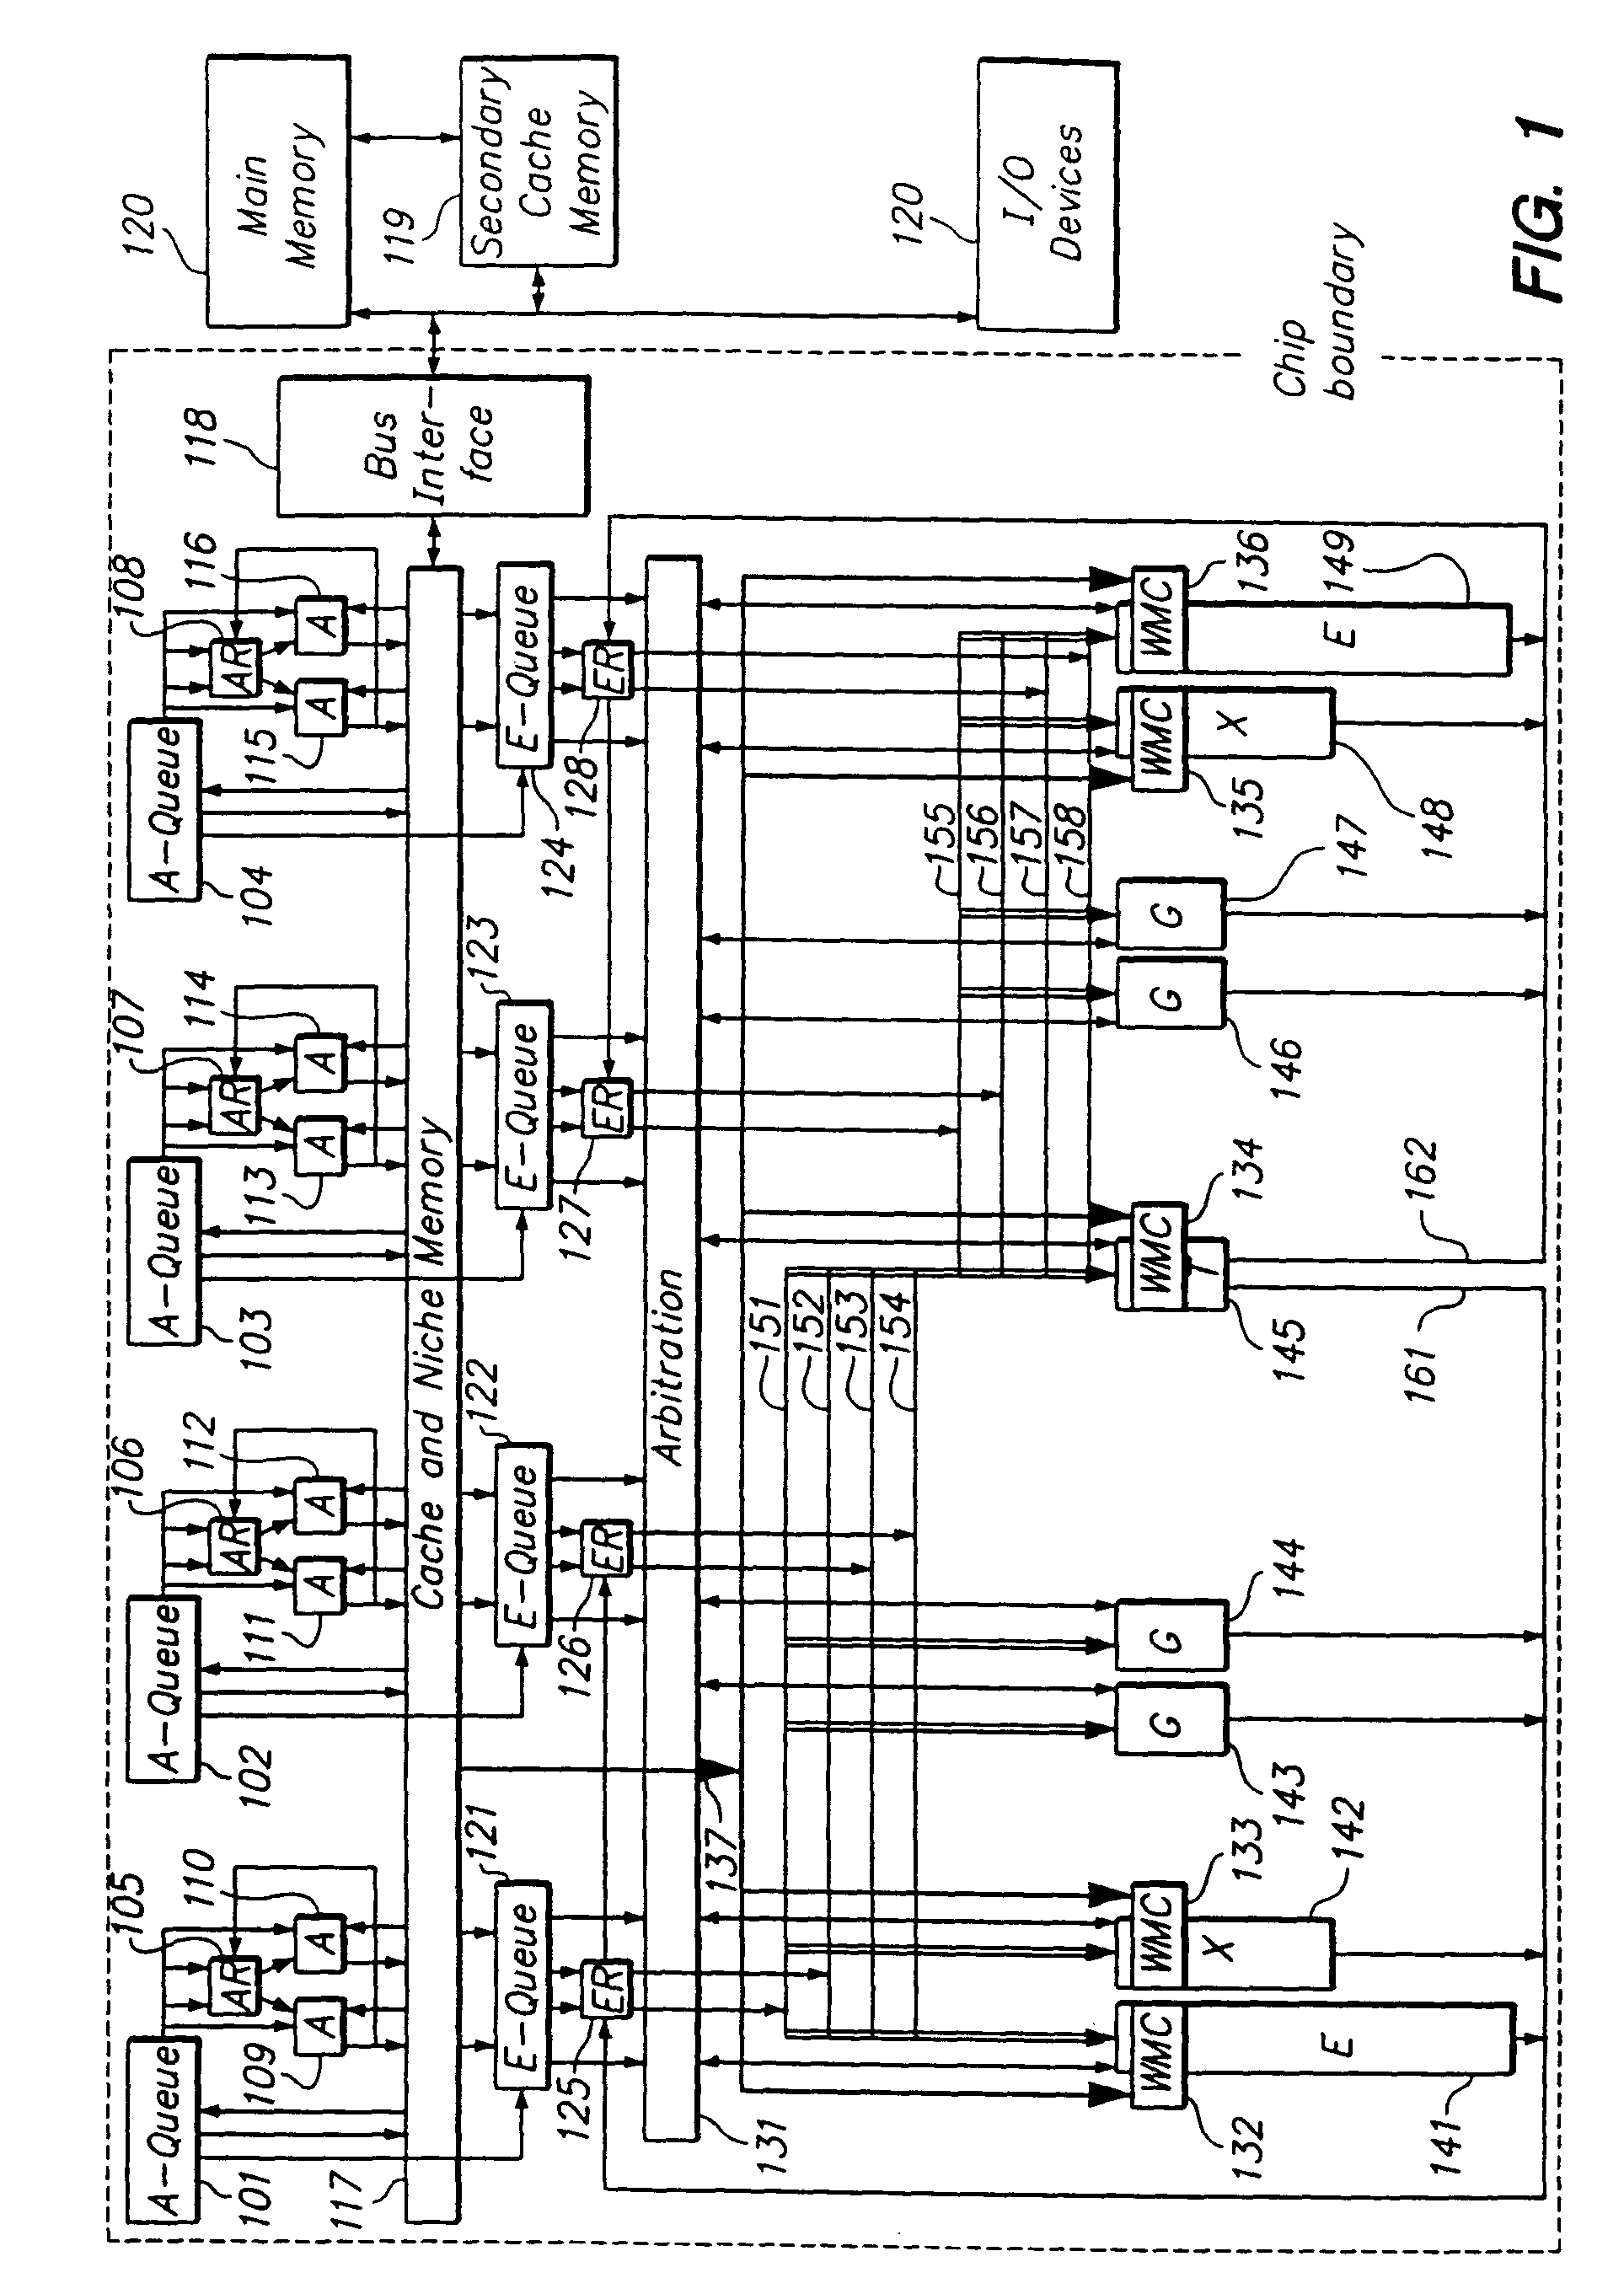 Programmable processor and method with wide operations